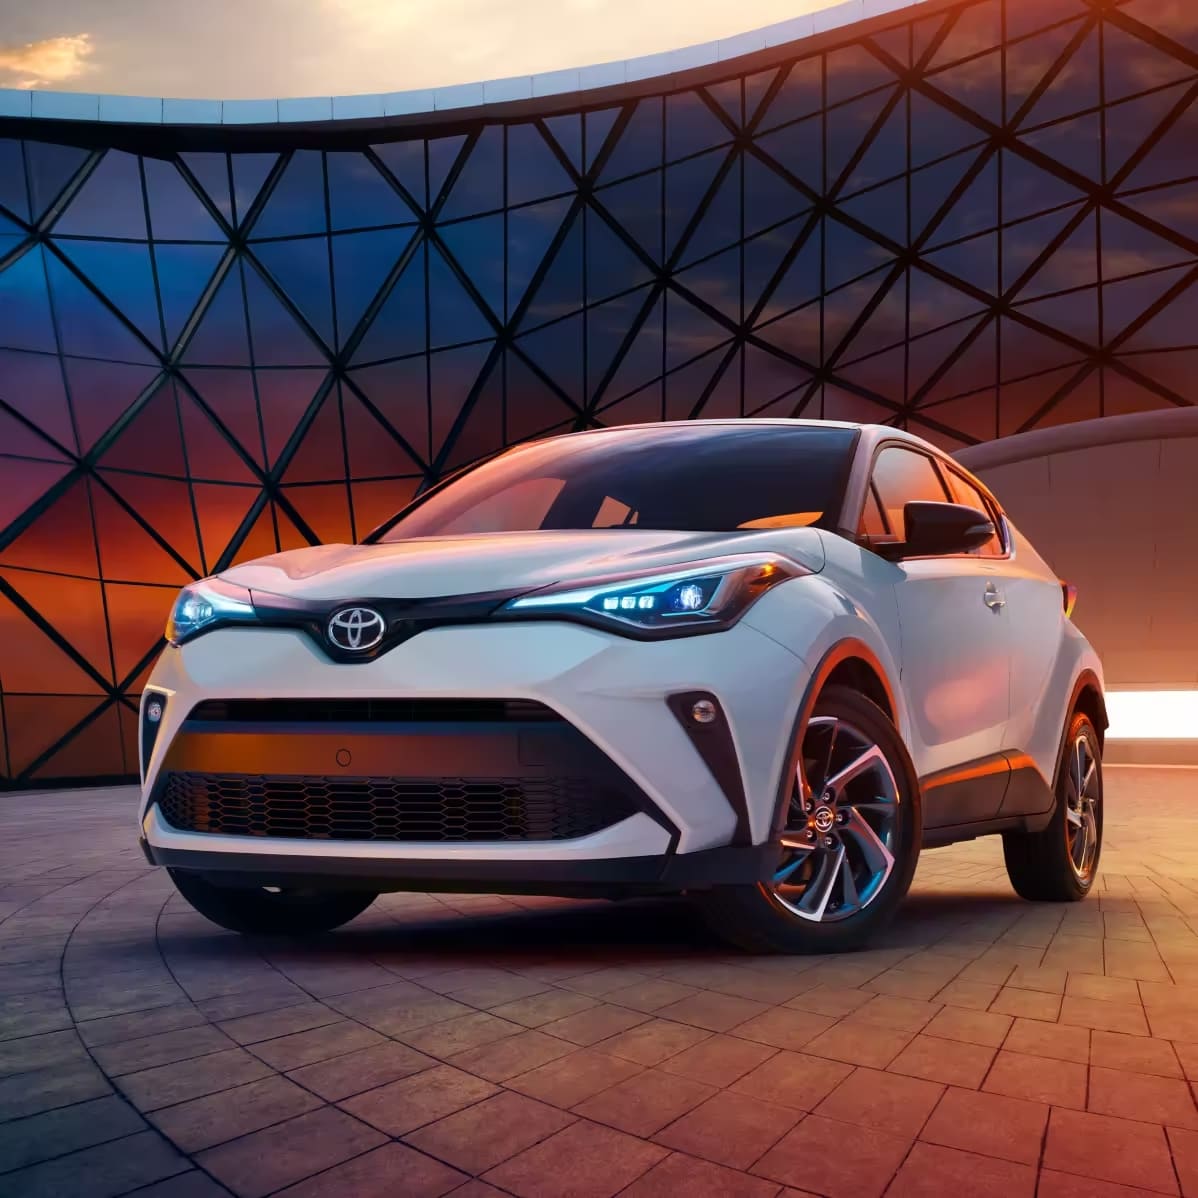 Looking for a Toyota C-HR in Knoxville, Tennessee? Toyota of Knoxville has the 2022 Toyota C-HR, 2020 Toyota C-HR, 2019 Toyota C-HR, 2018 Toyota C-HR, and 2017 Toyota C-HR models available. See us today and take a test drive.